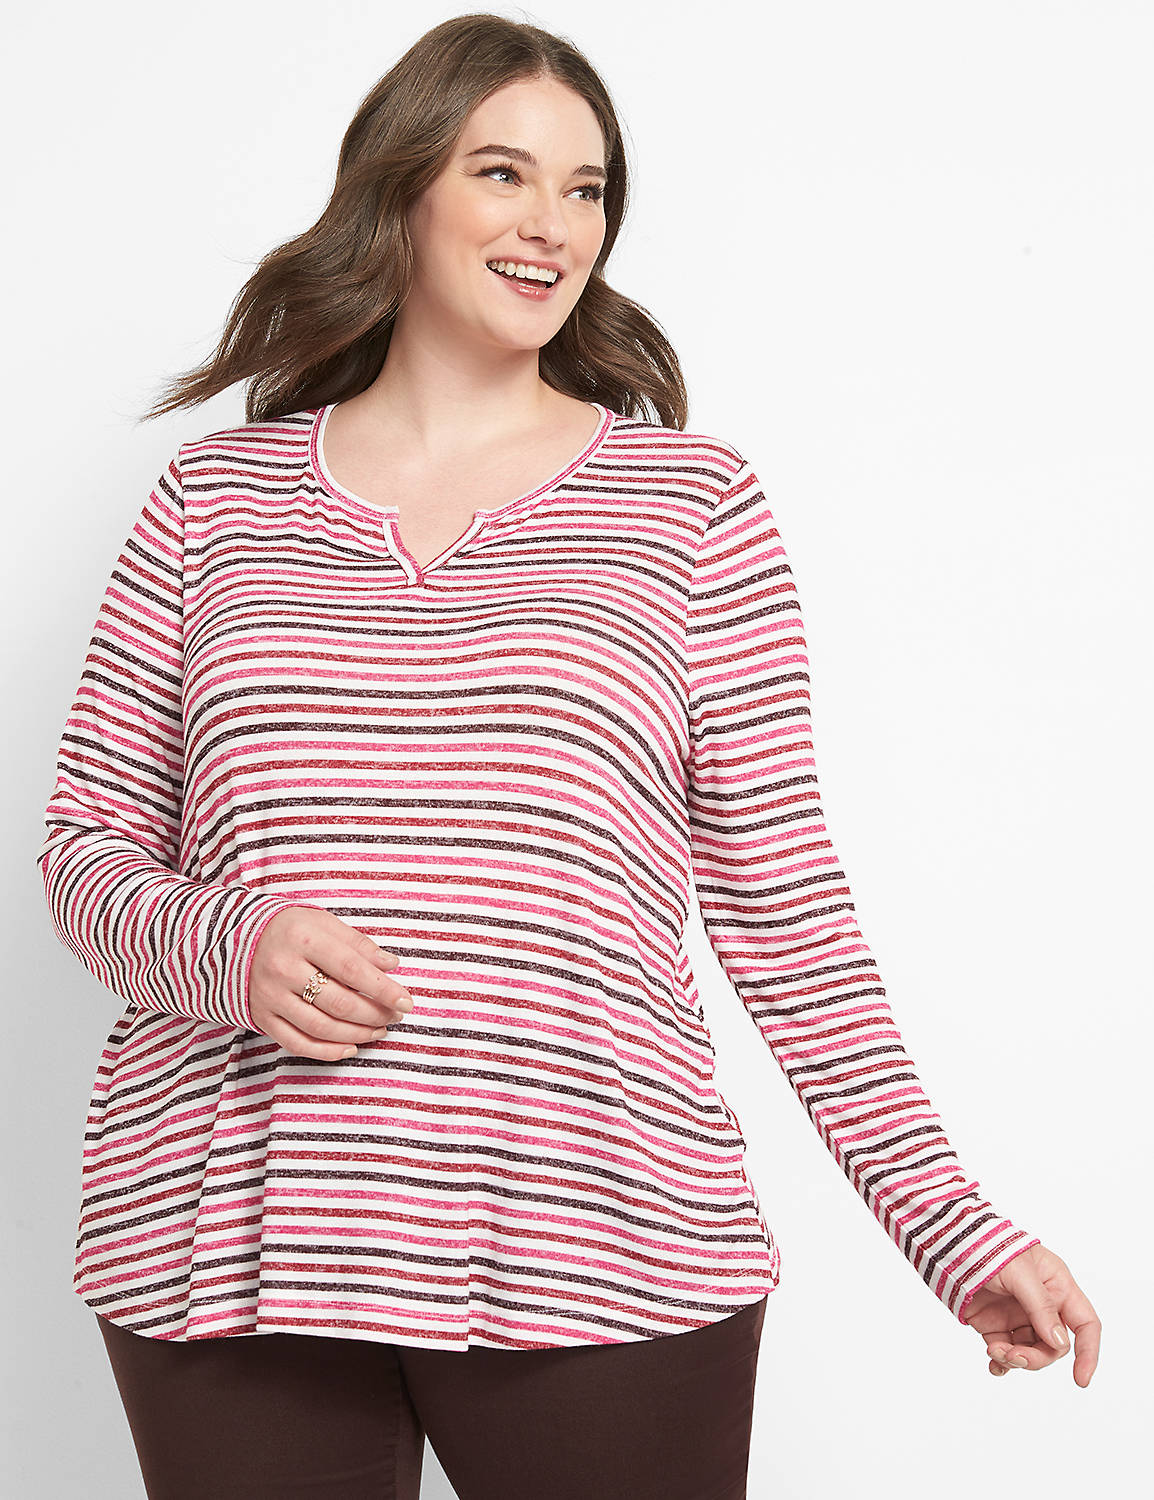 Long Sleeve Notch Neck Swing Tee Print 1123731:LBH21149_VailStripeTwoWay_V2_CW9:10/12 Product Image 1